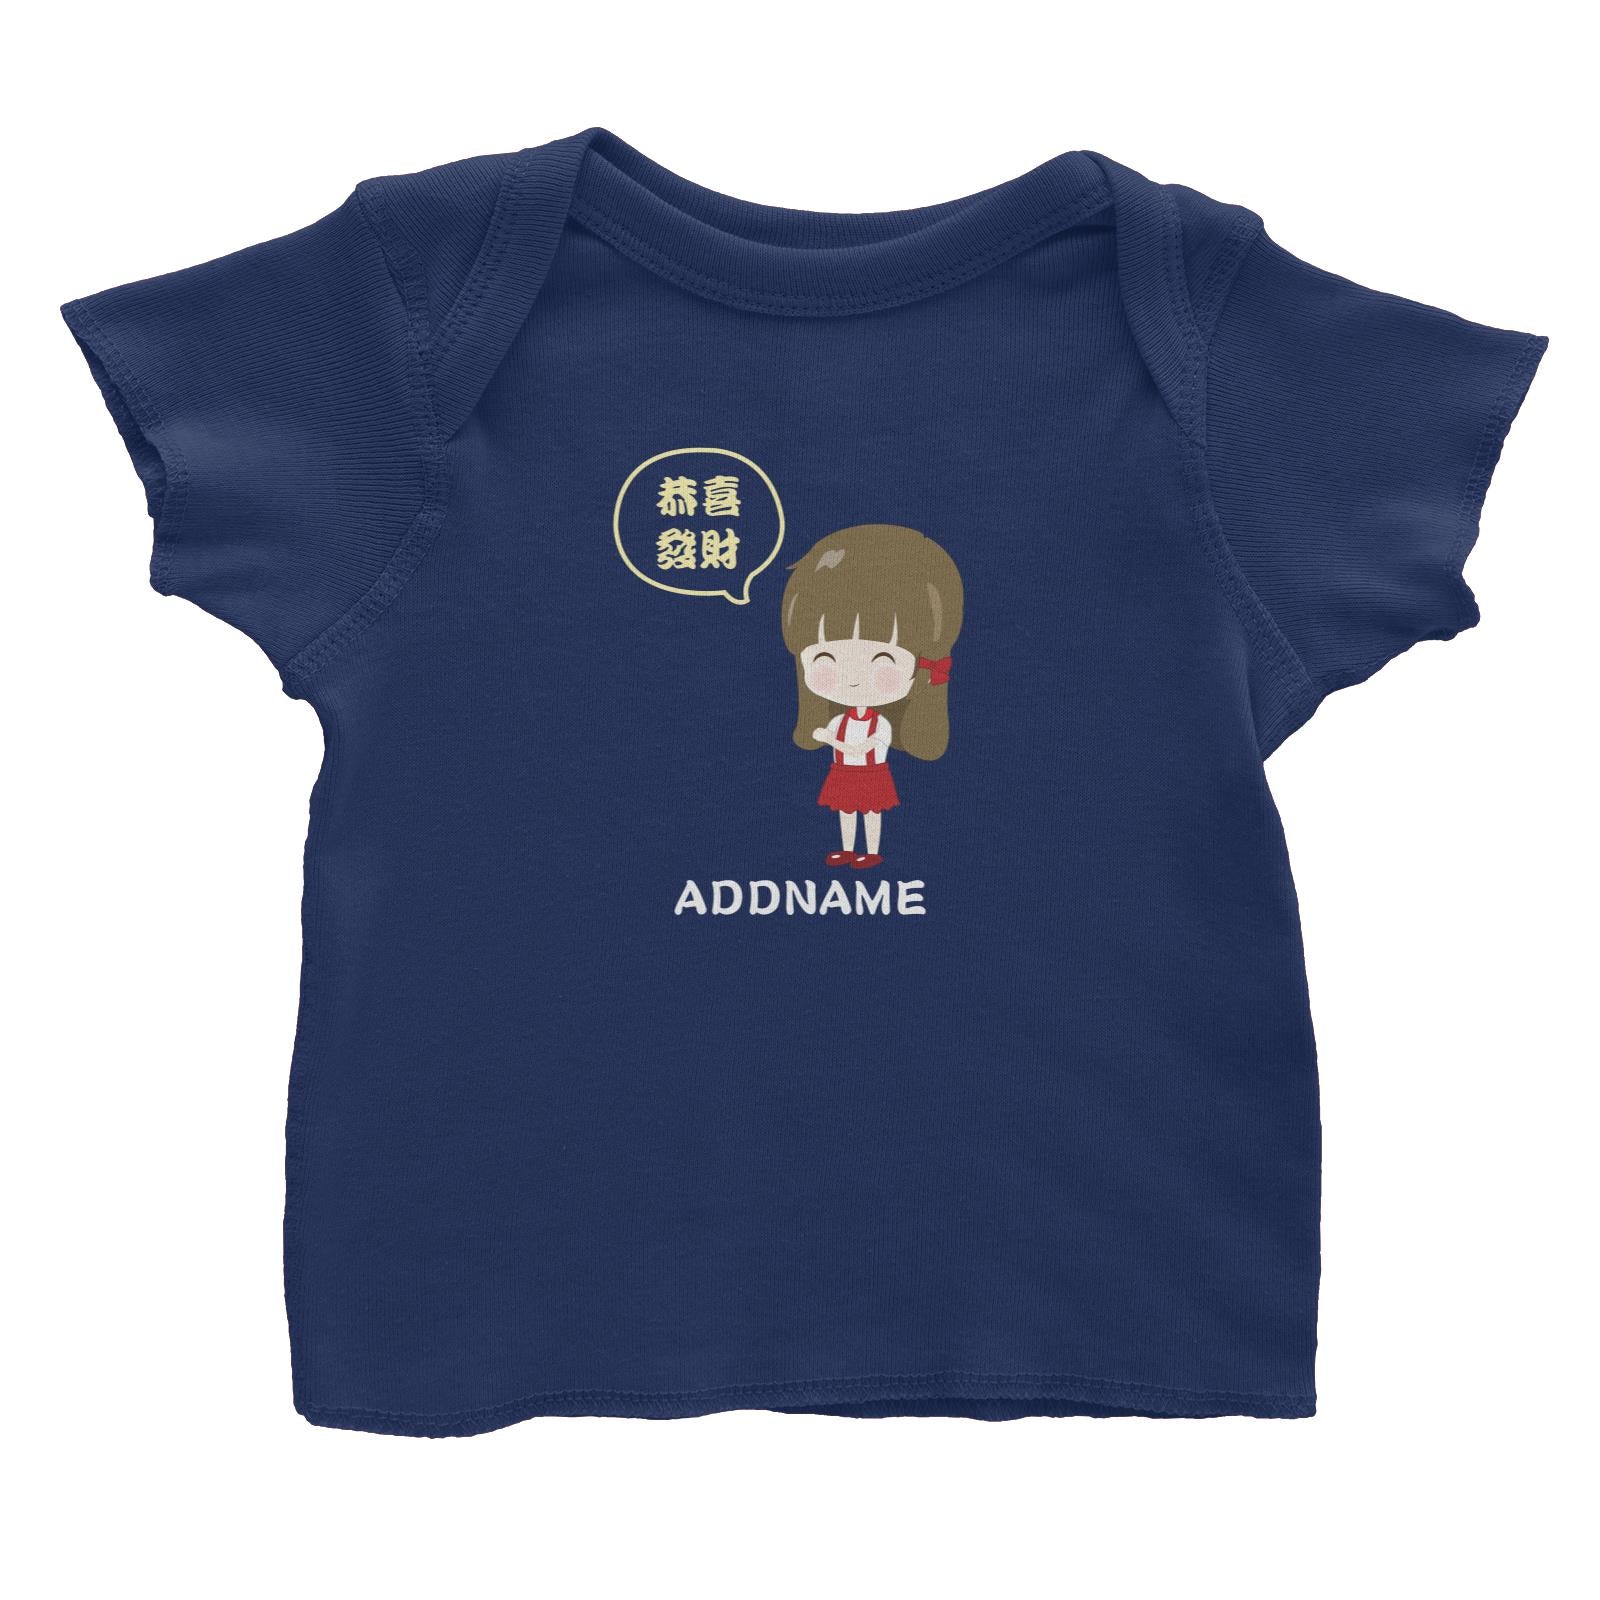 Chinese New Year Family Gong Xi Fai Cai Girl Addname Baby T-Shirt